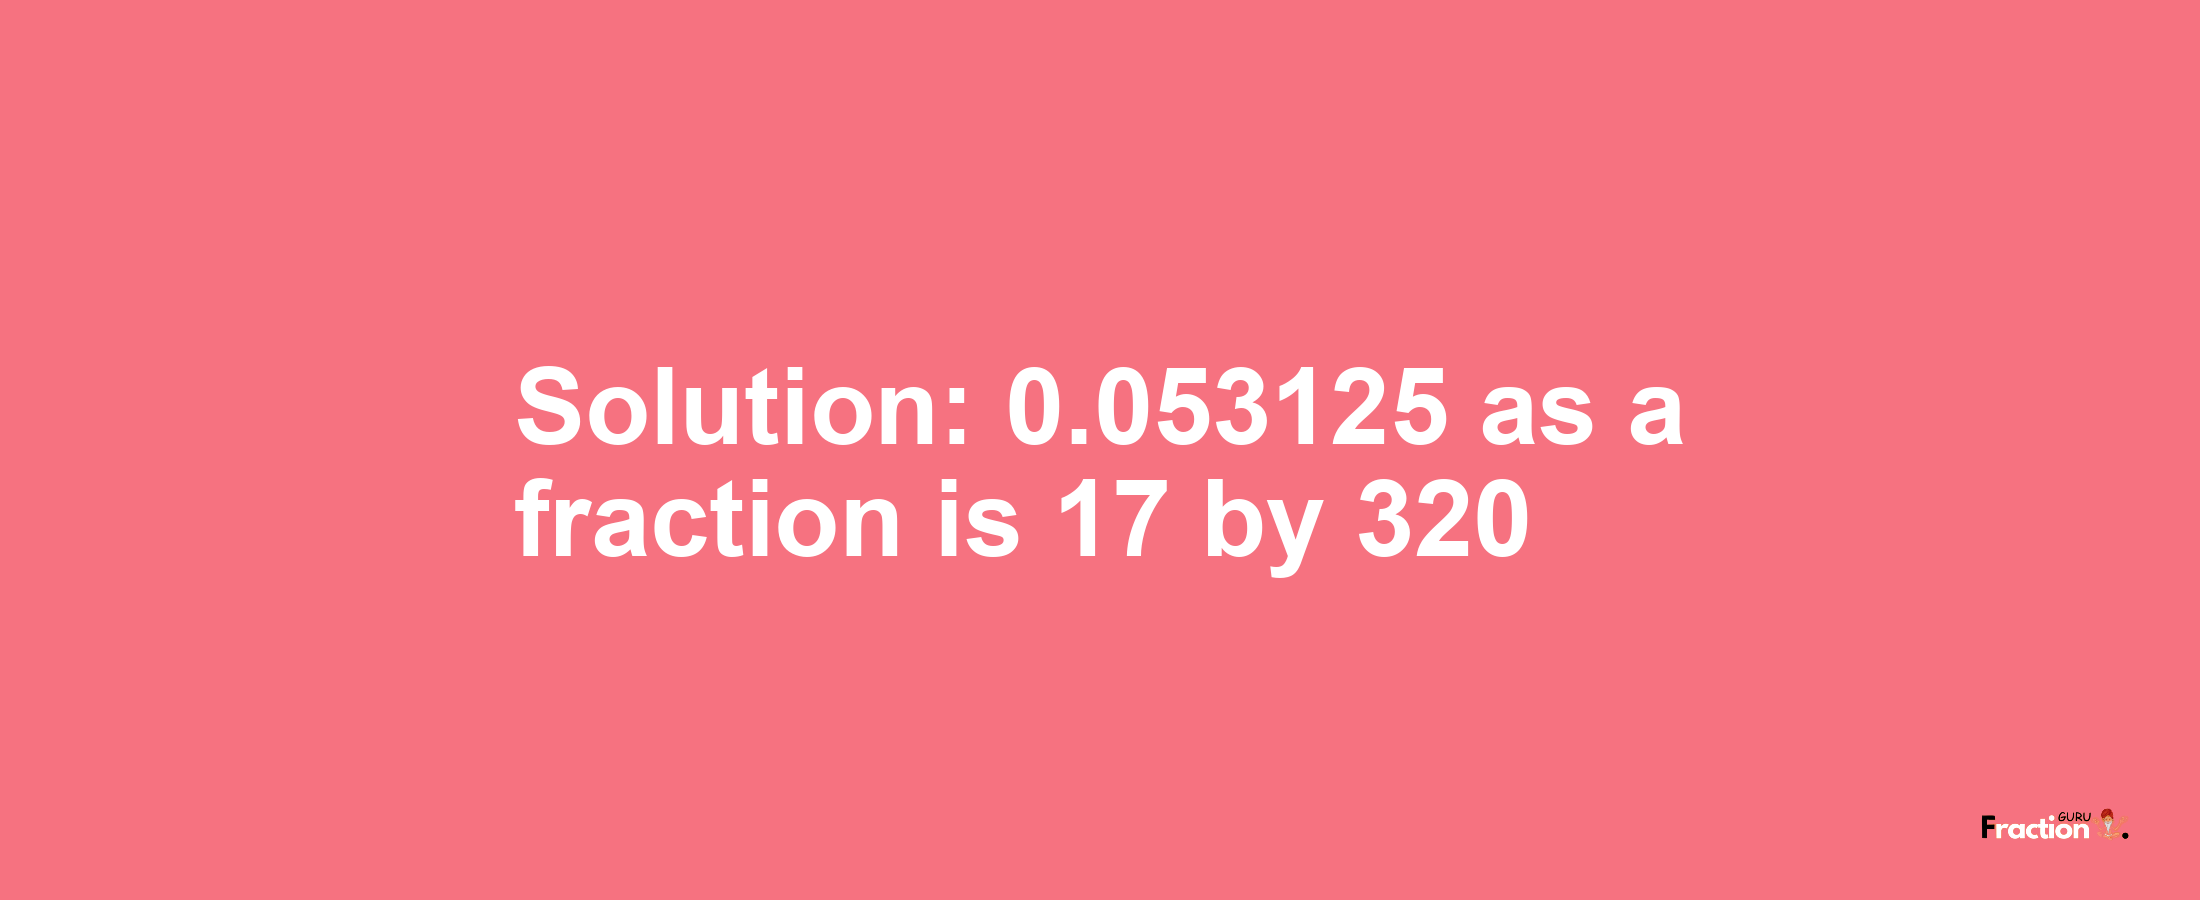 Solution:0.053125 as a fraction is 17/320